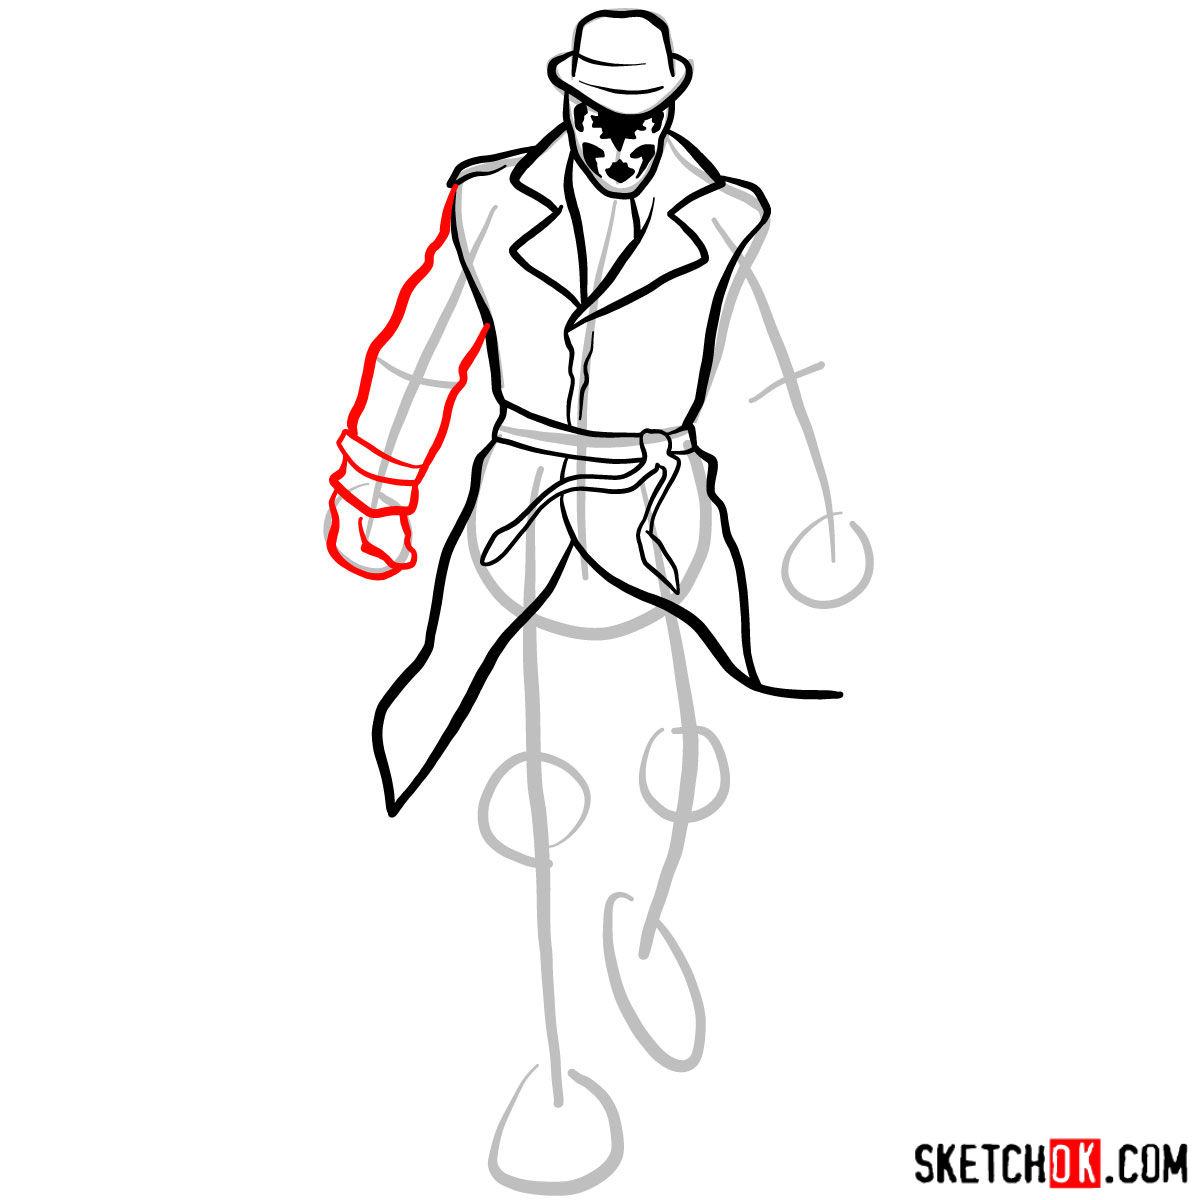 How to draw Rorschach from Watchmen - step 07